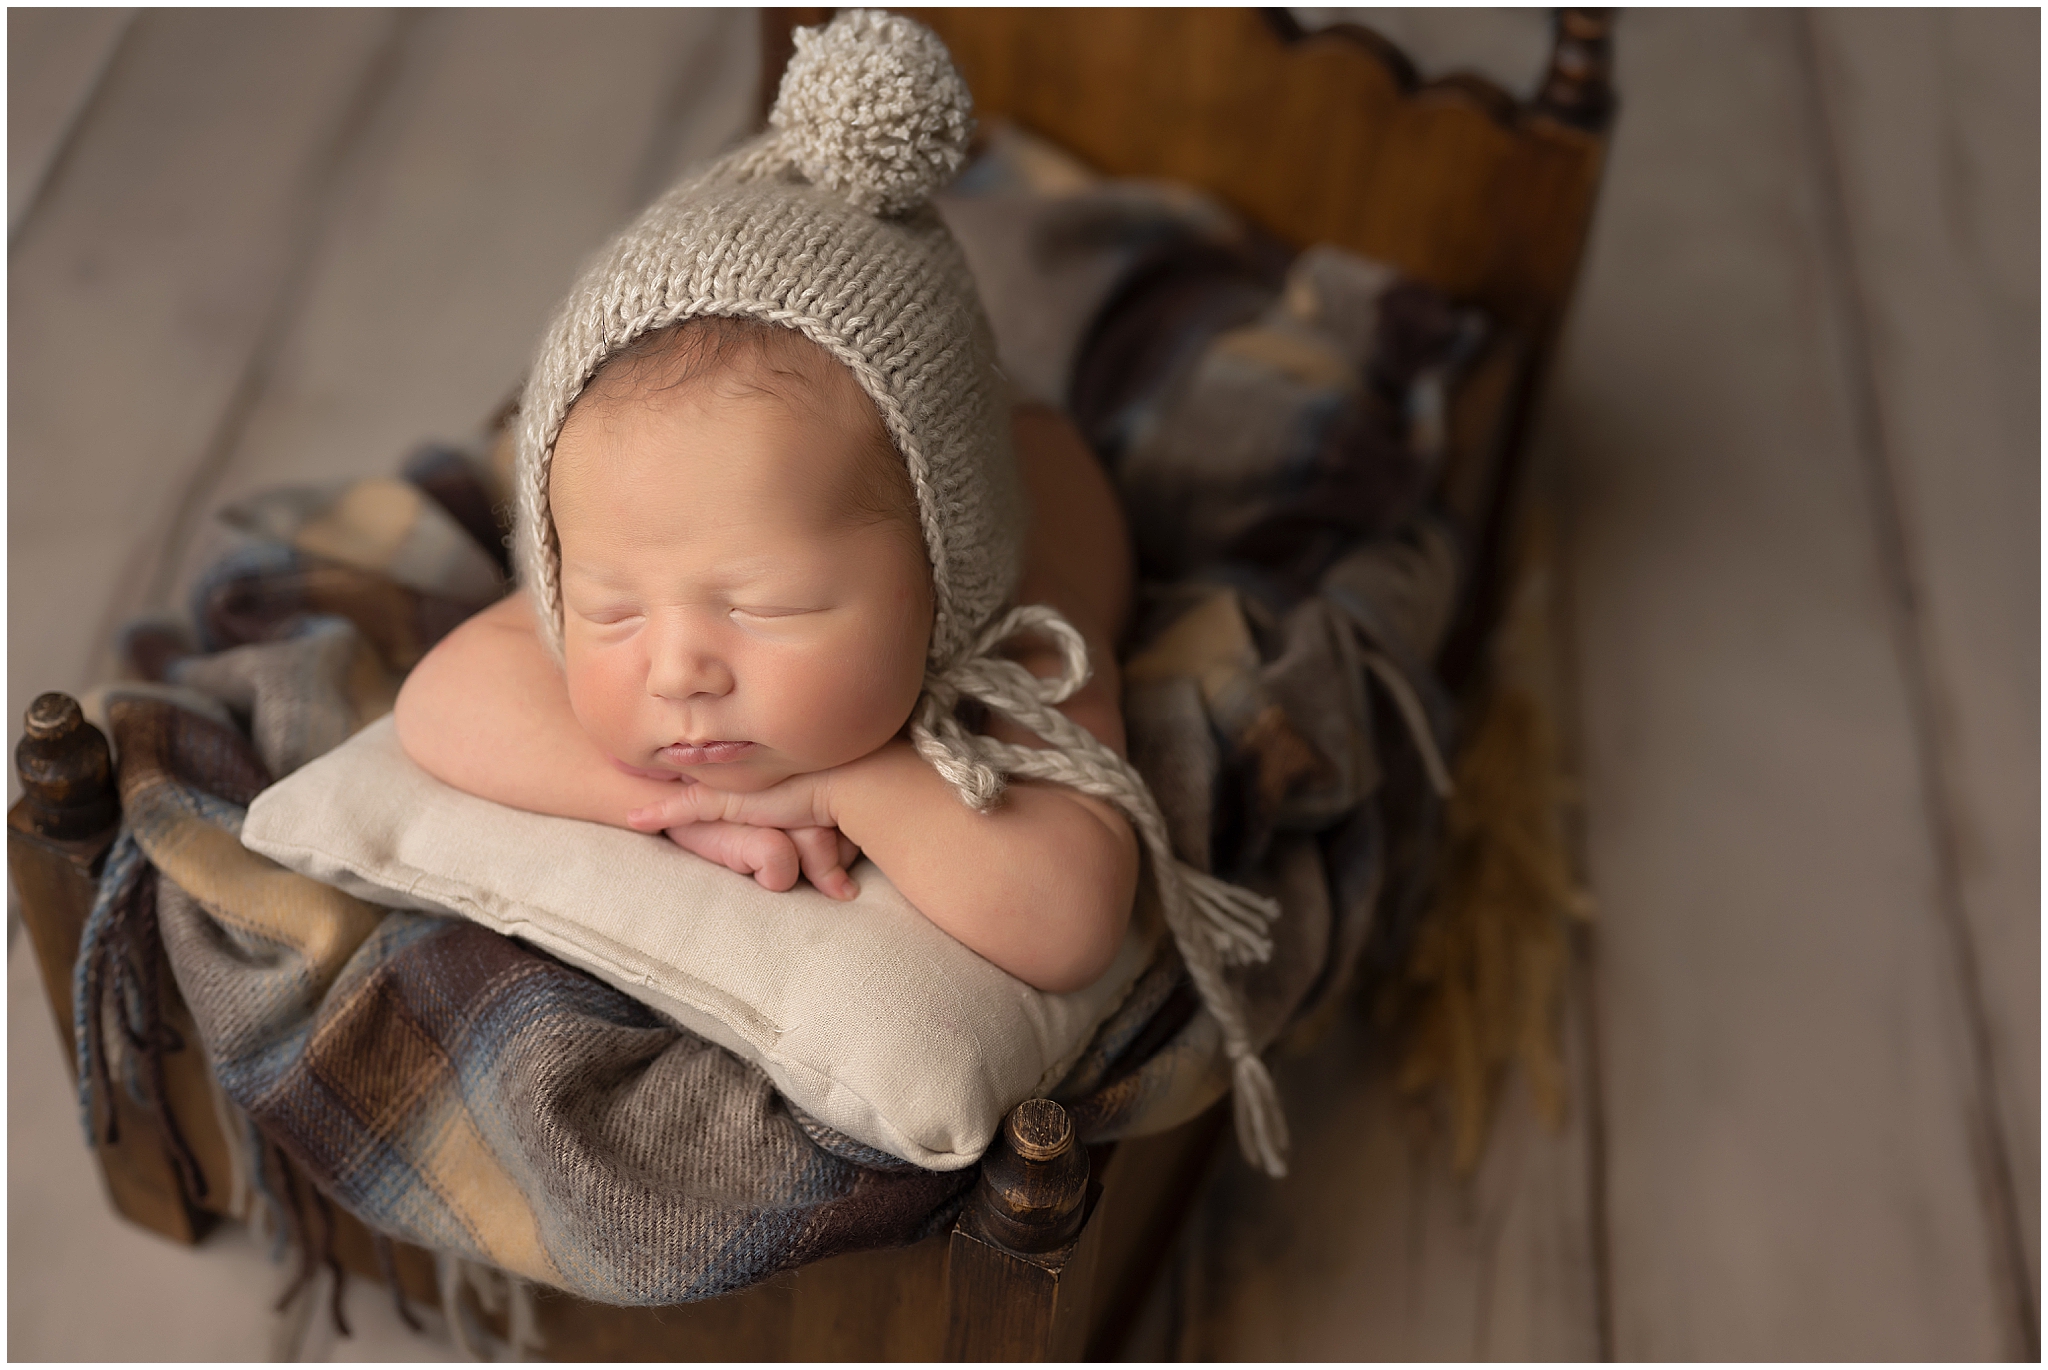 baby boy sleeping on tiny bed during newborn session at studio in london, ontario